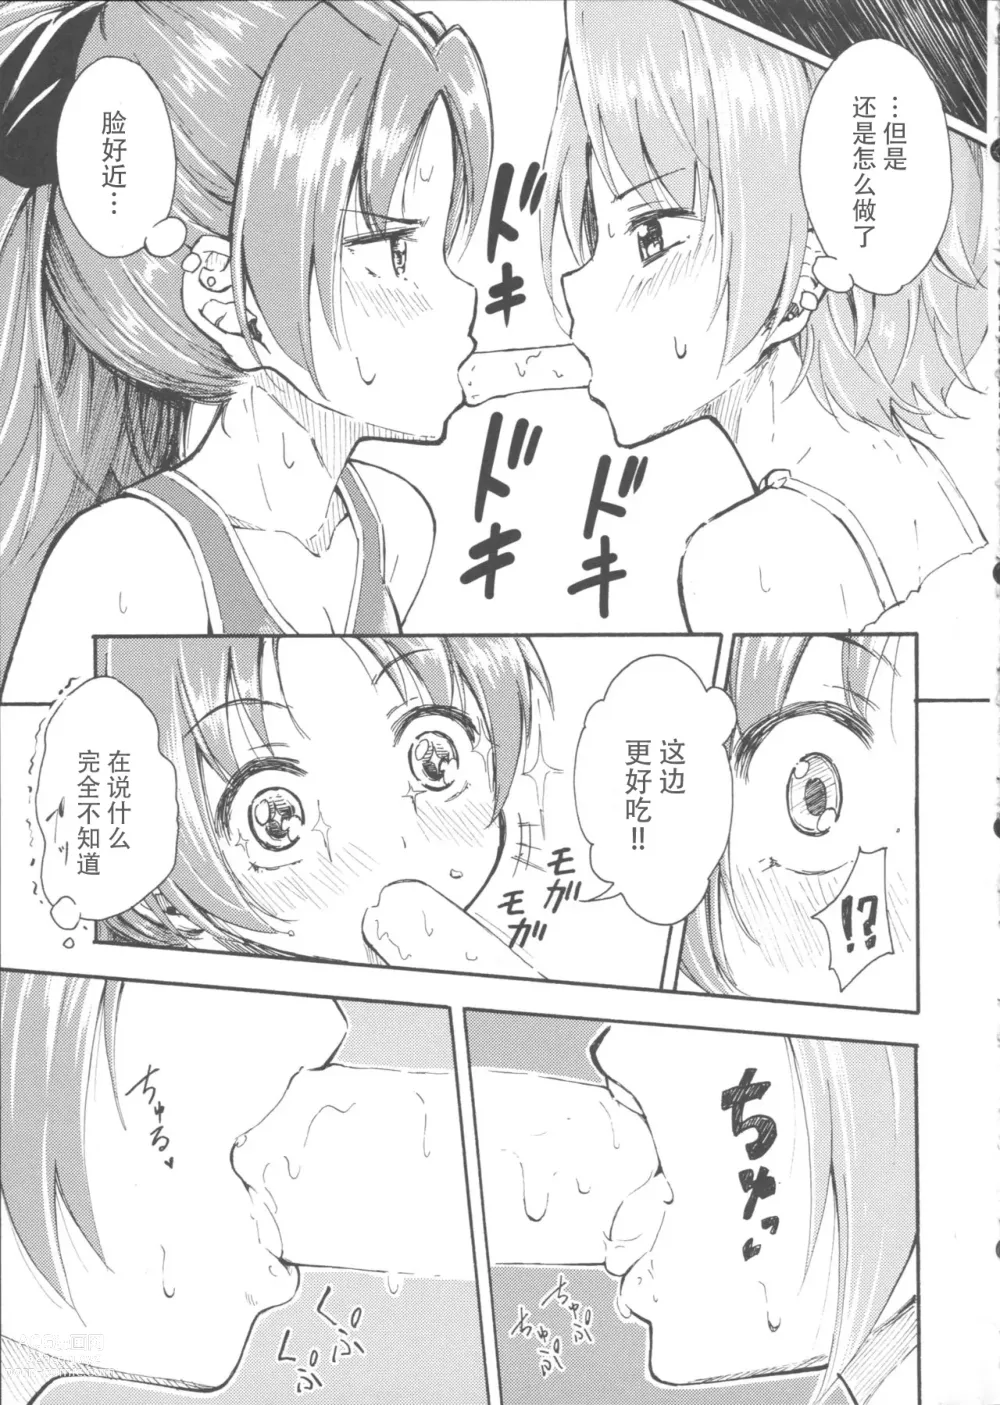 Page 9 of doujinshi Lovely Girls Lily vol. 9.5